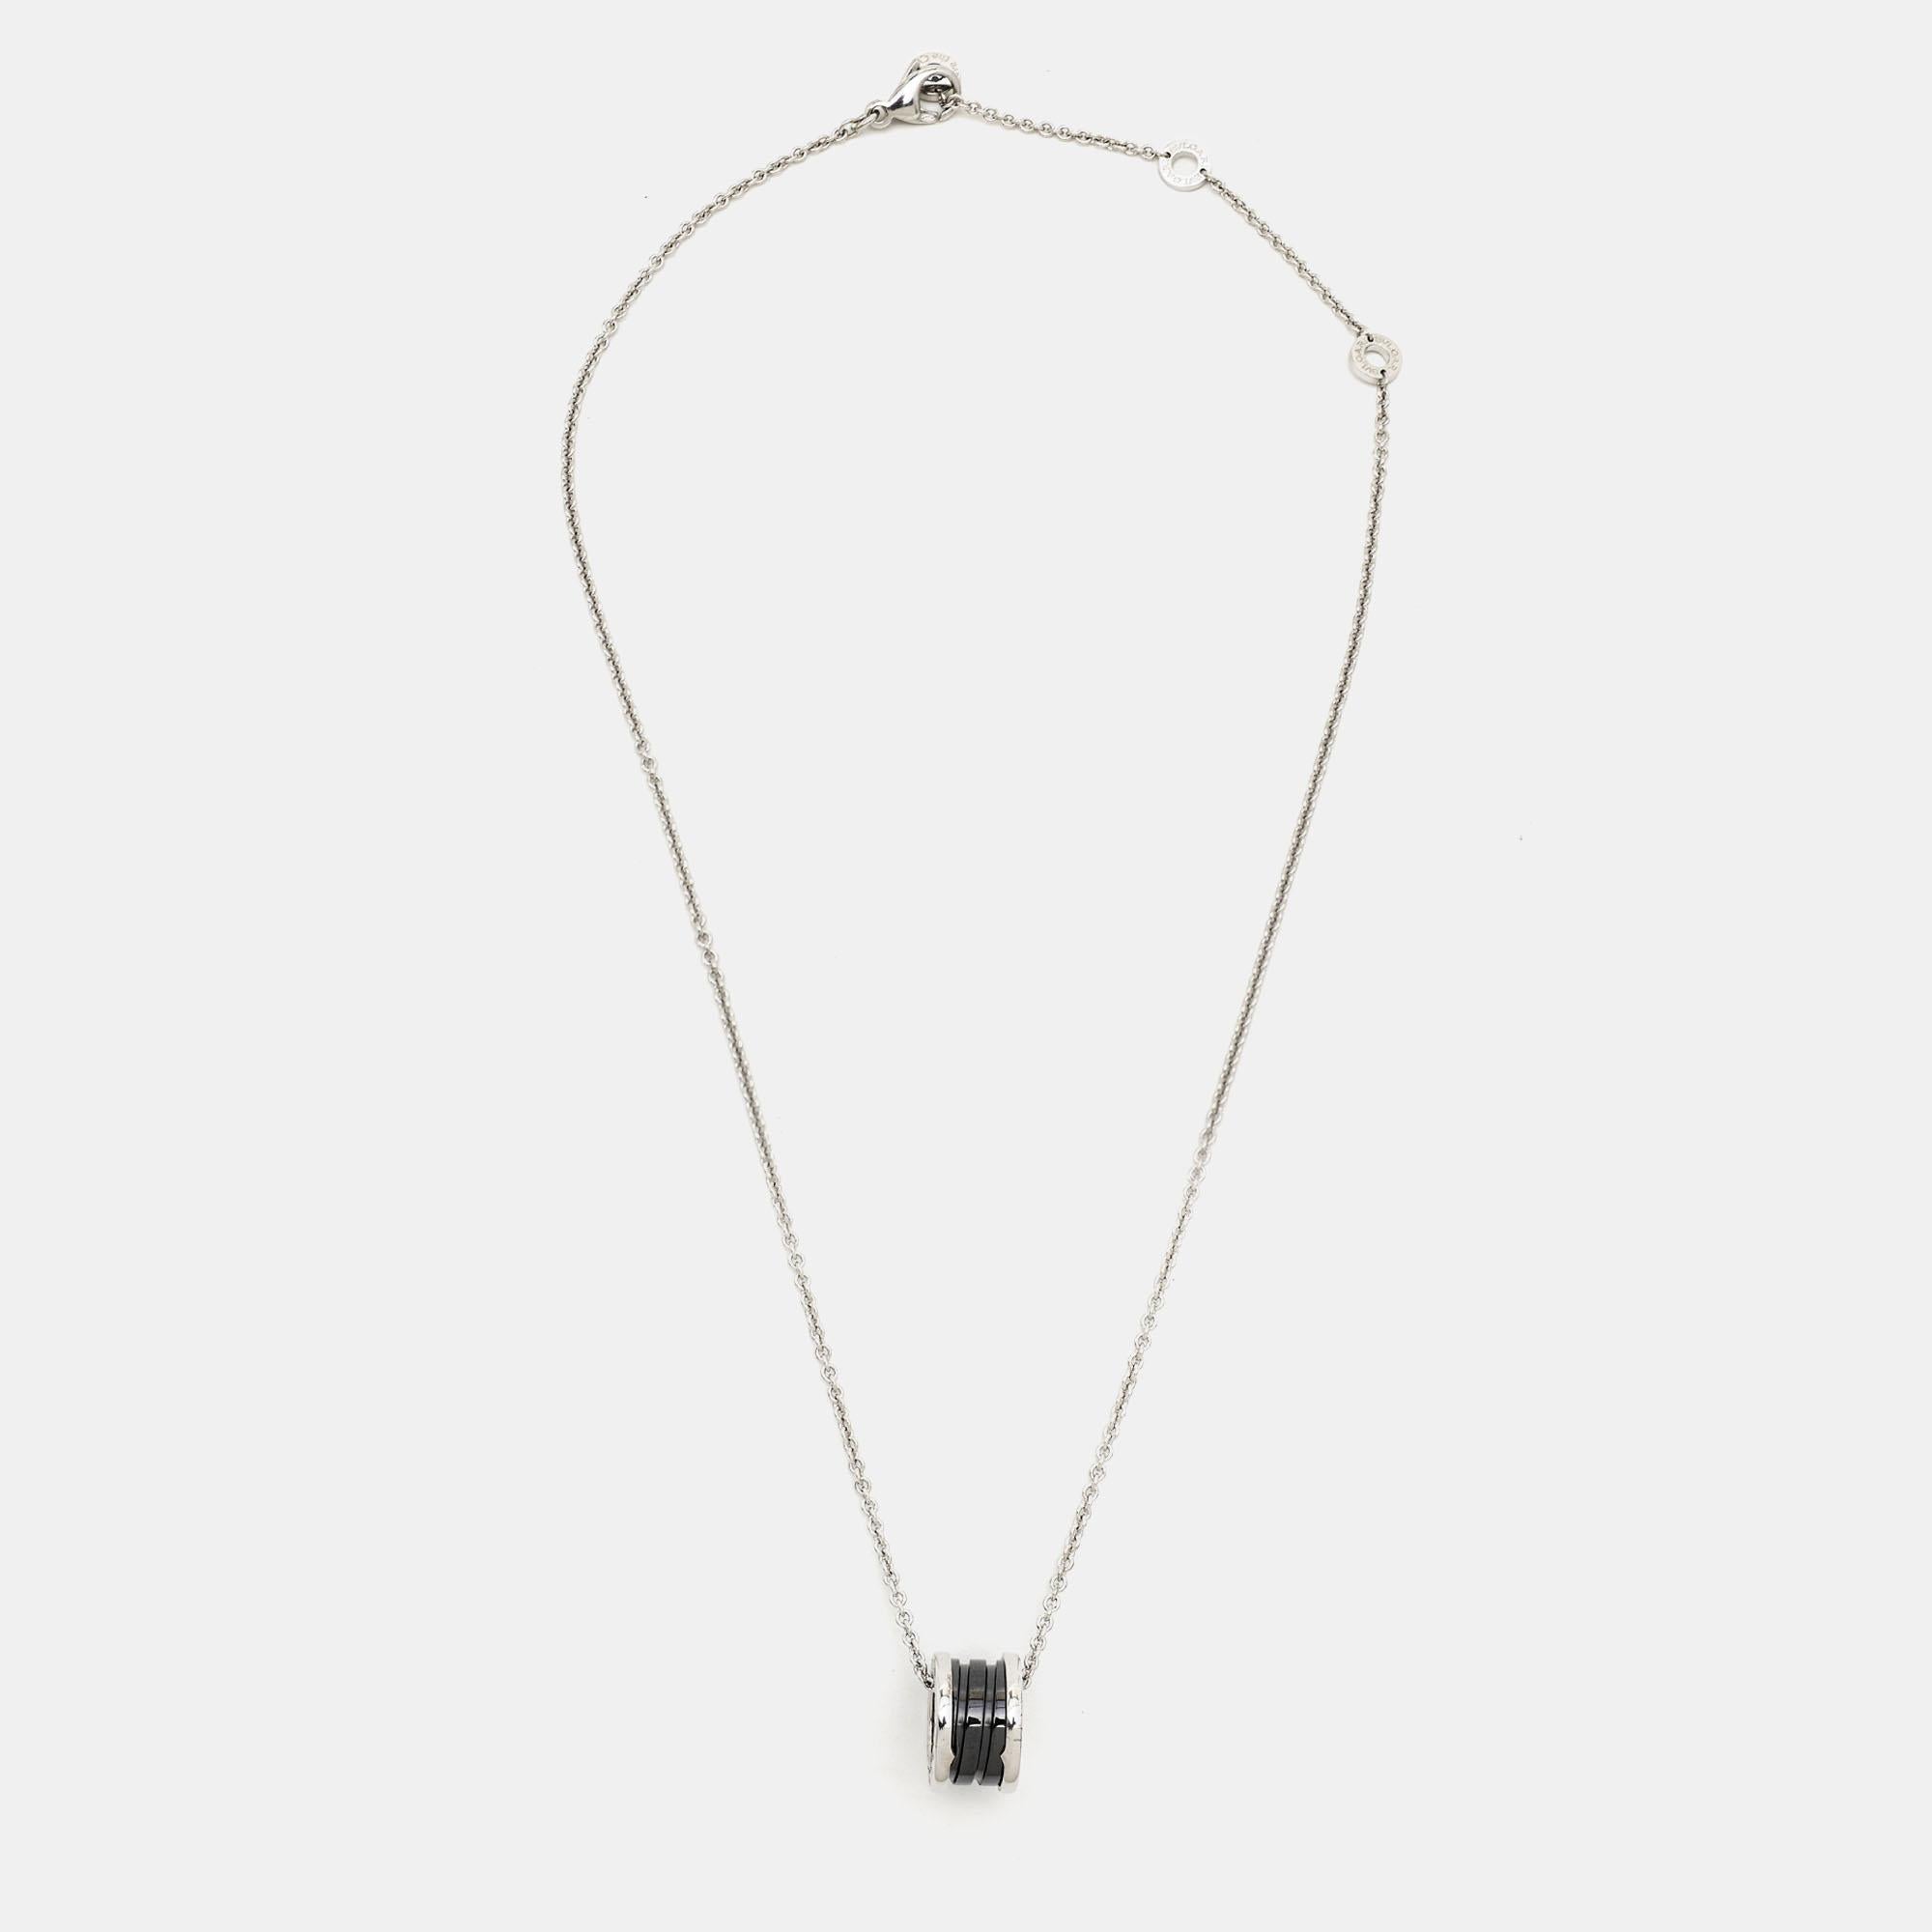 Experience elegance with the Bvlgari B.Zero1 Save the Children necklace. Crafted with ceramic and sterling silver, it exudes timeless charm. The iconic Bvlgari design seamlessly merges with a noble cause, as proceeds contribute to Save the Children.